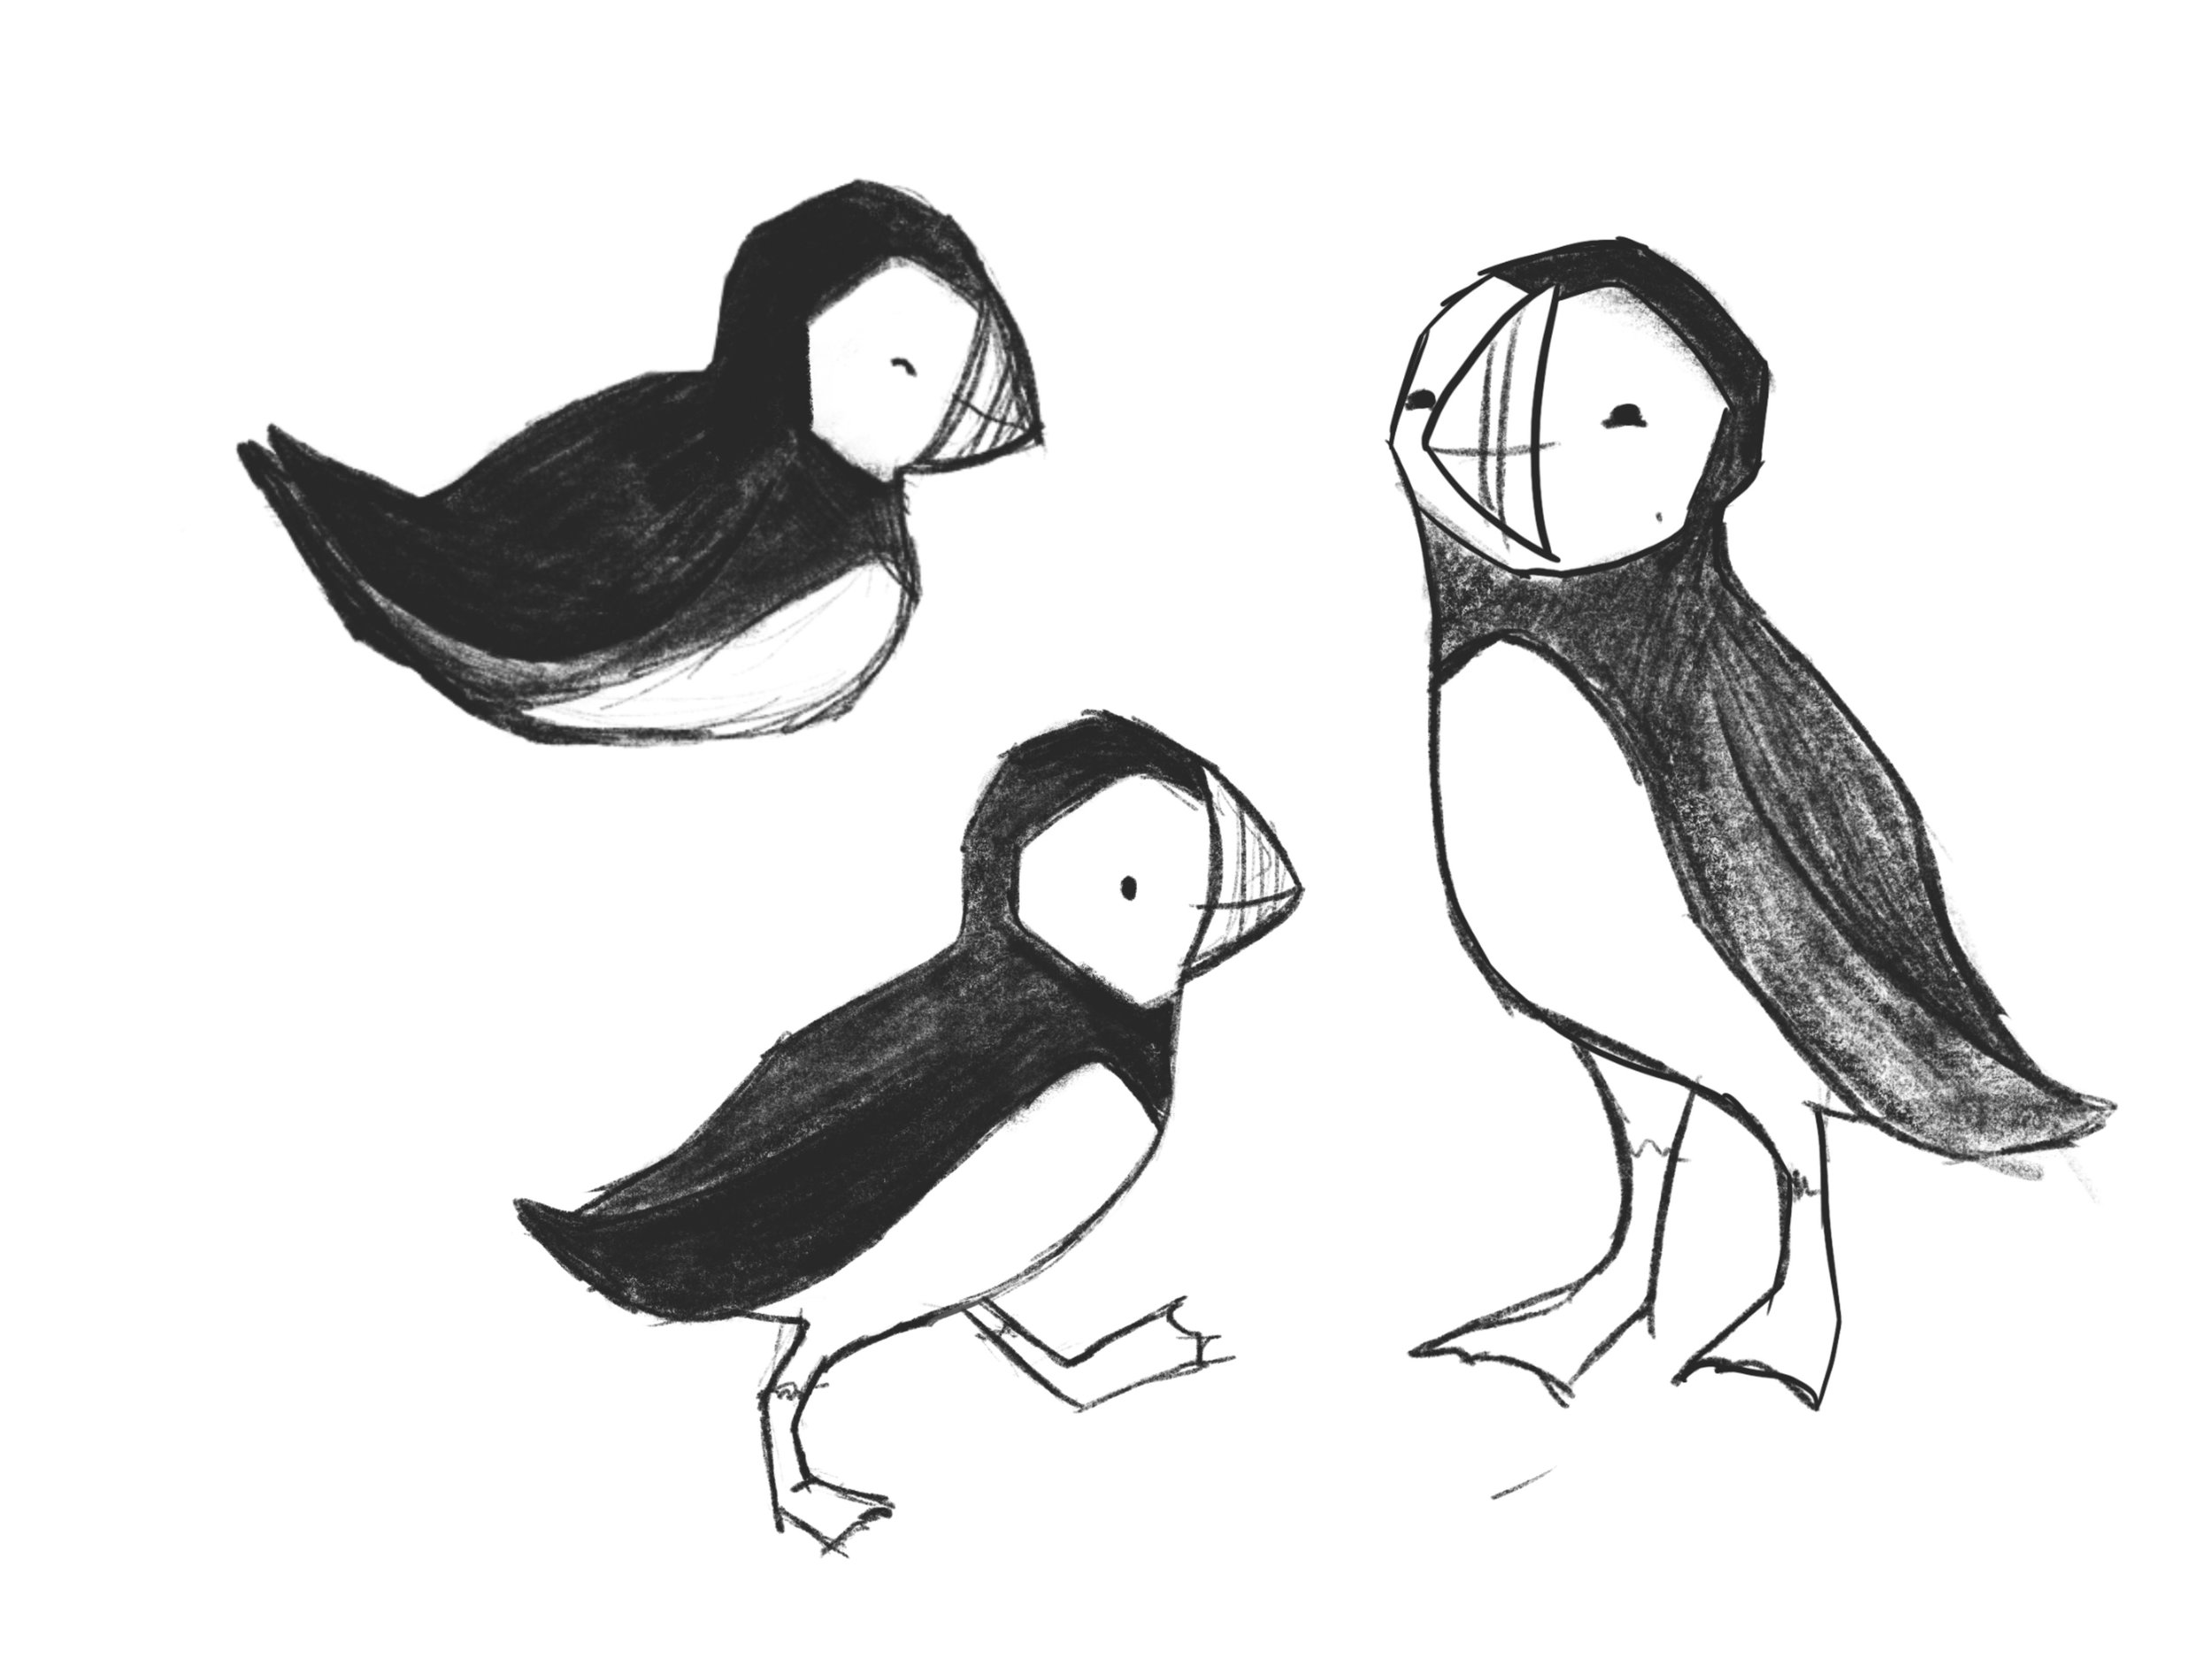 How to make a poster article. Image of puffins drawings